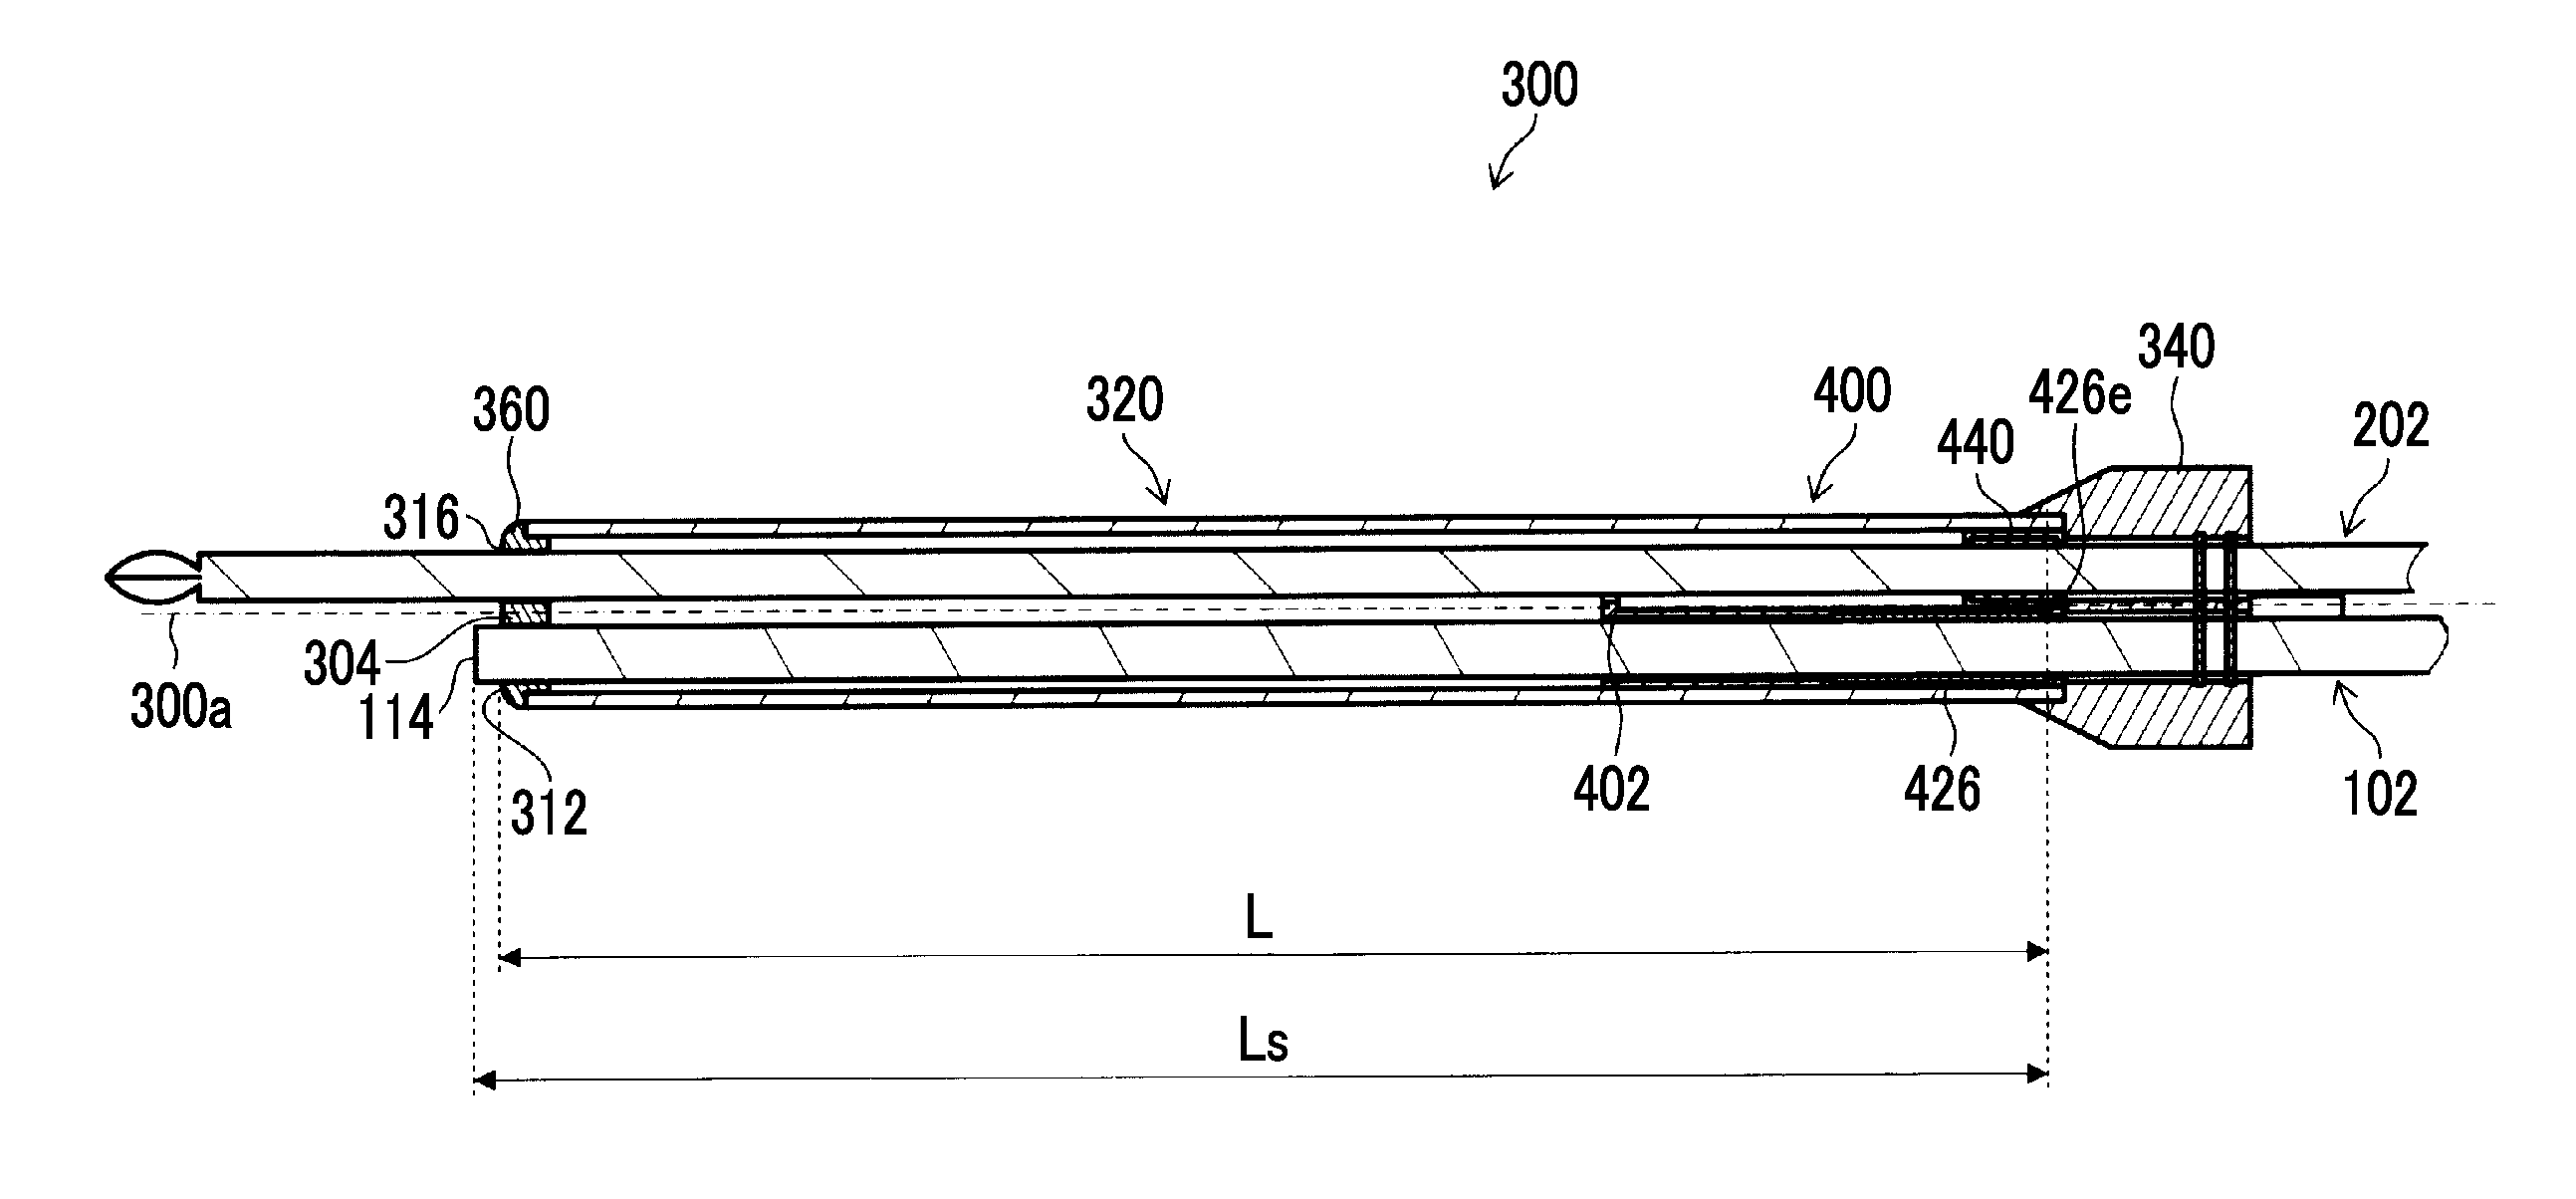 Endoscopic surgical device and outer sleeve